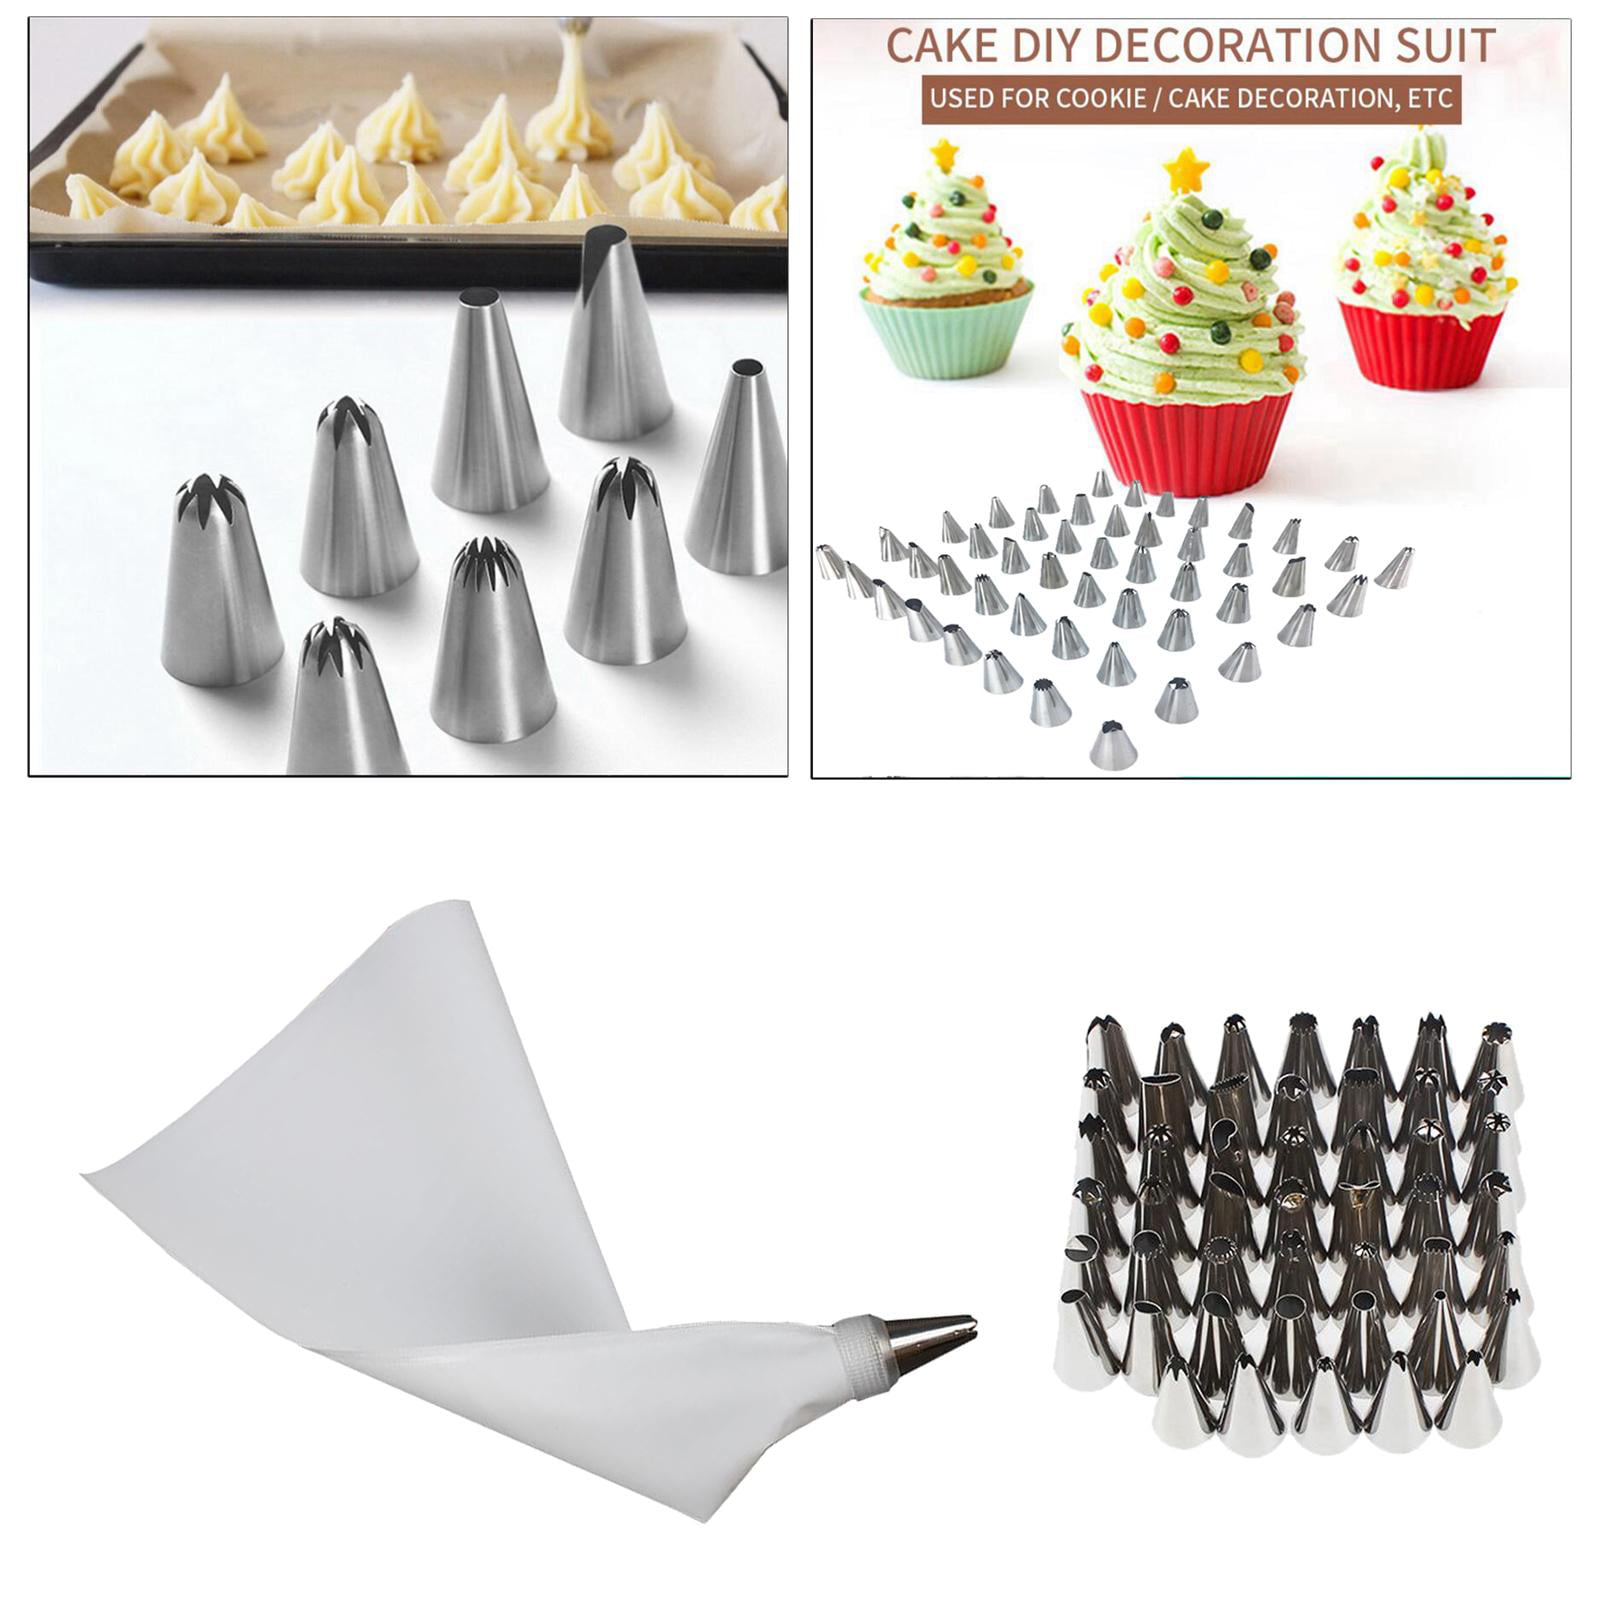 Buy Perfect Pricee 12 Piece Cake Decorating Set Frosting Icing Piping Bag  Tips with Steel Nozzles Online at Low Prices in India - Amazon.in